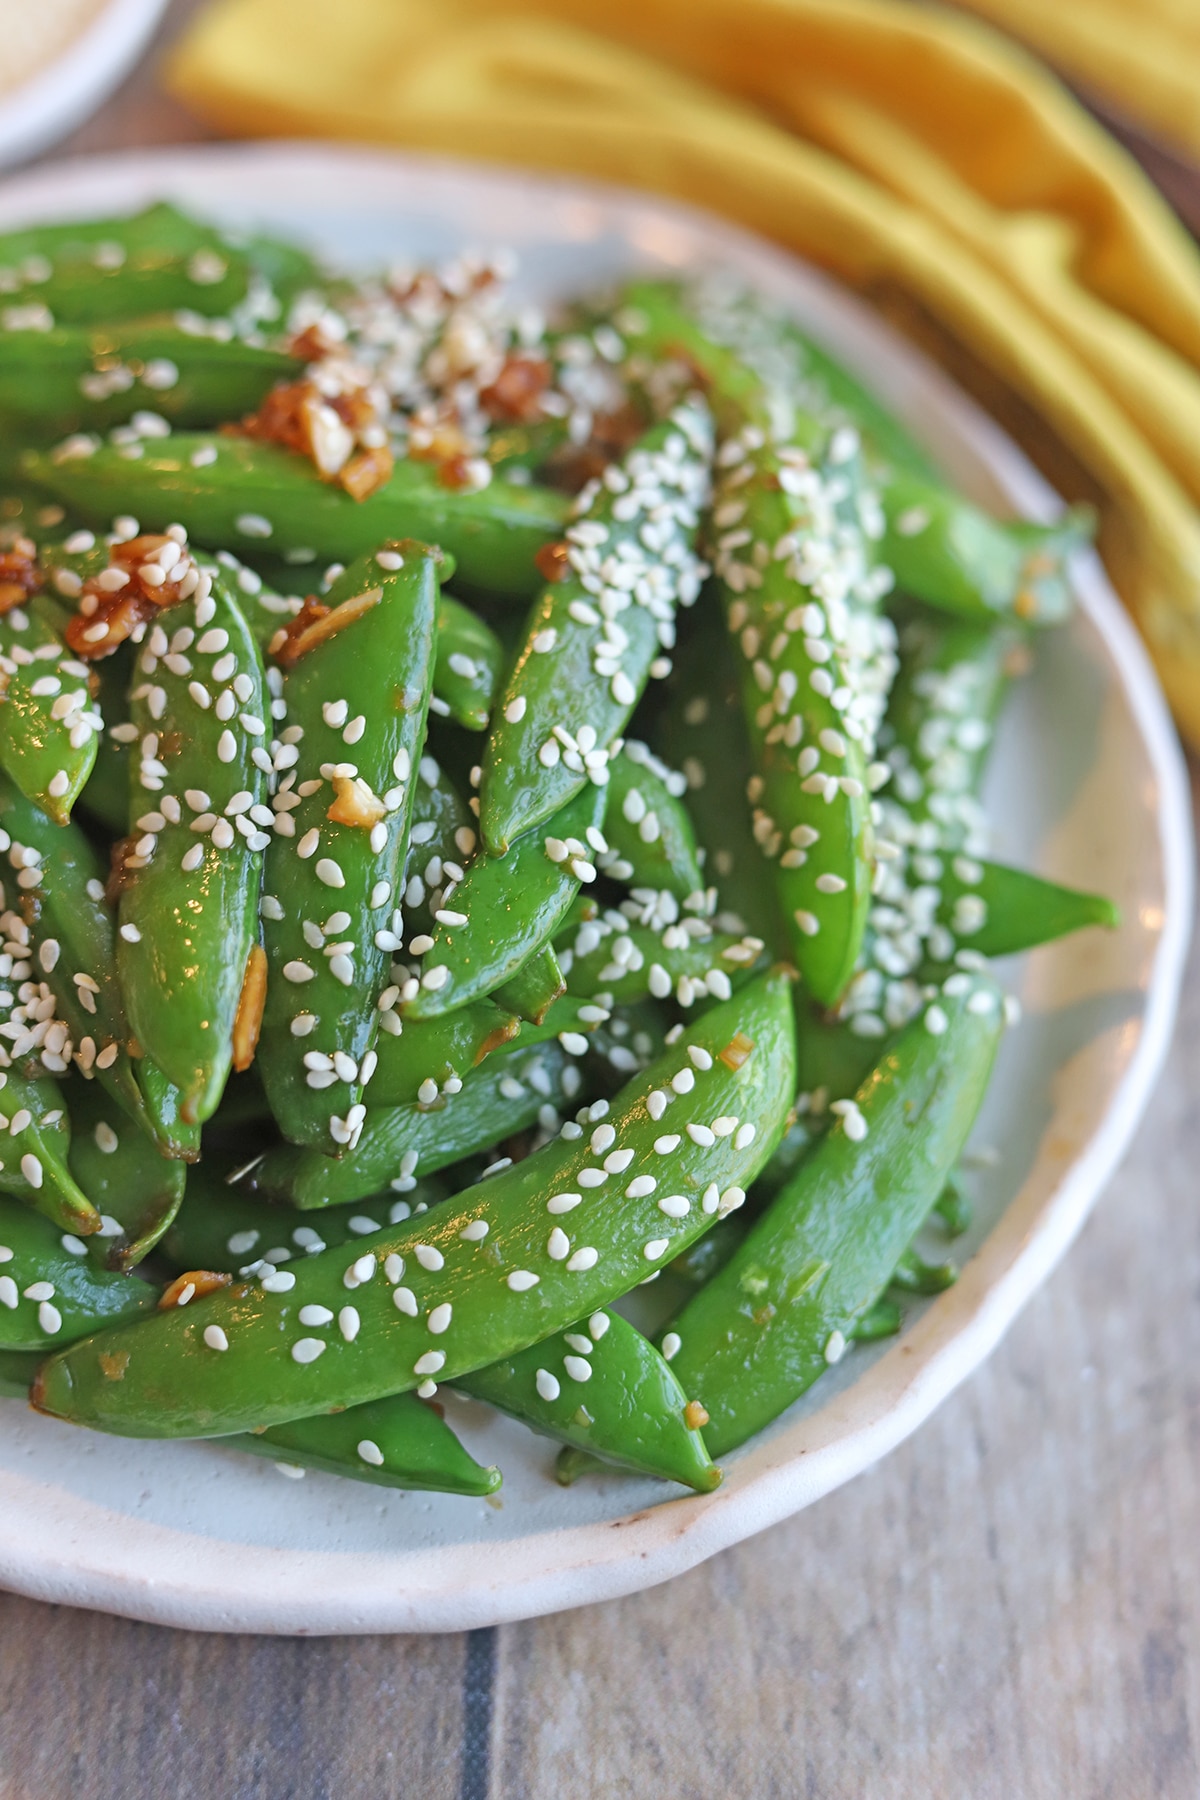 Sugar snap peas on plate, topped with sesame seeds.